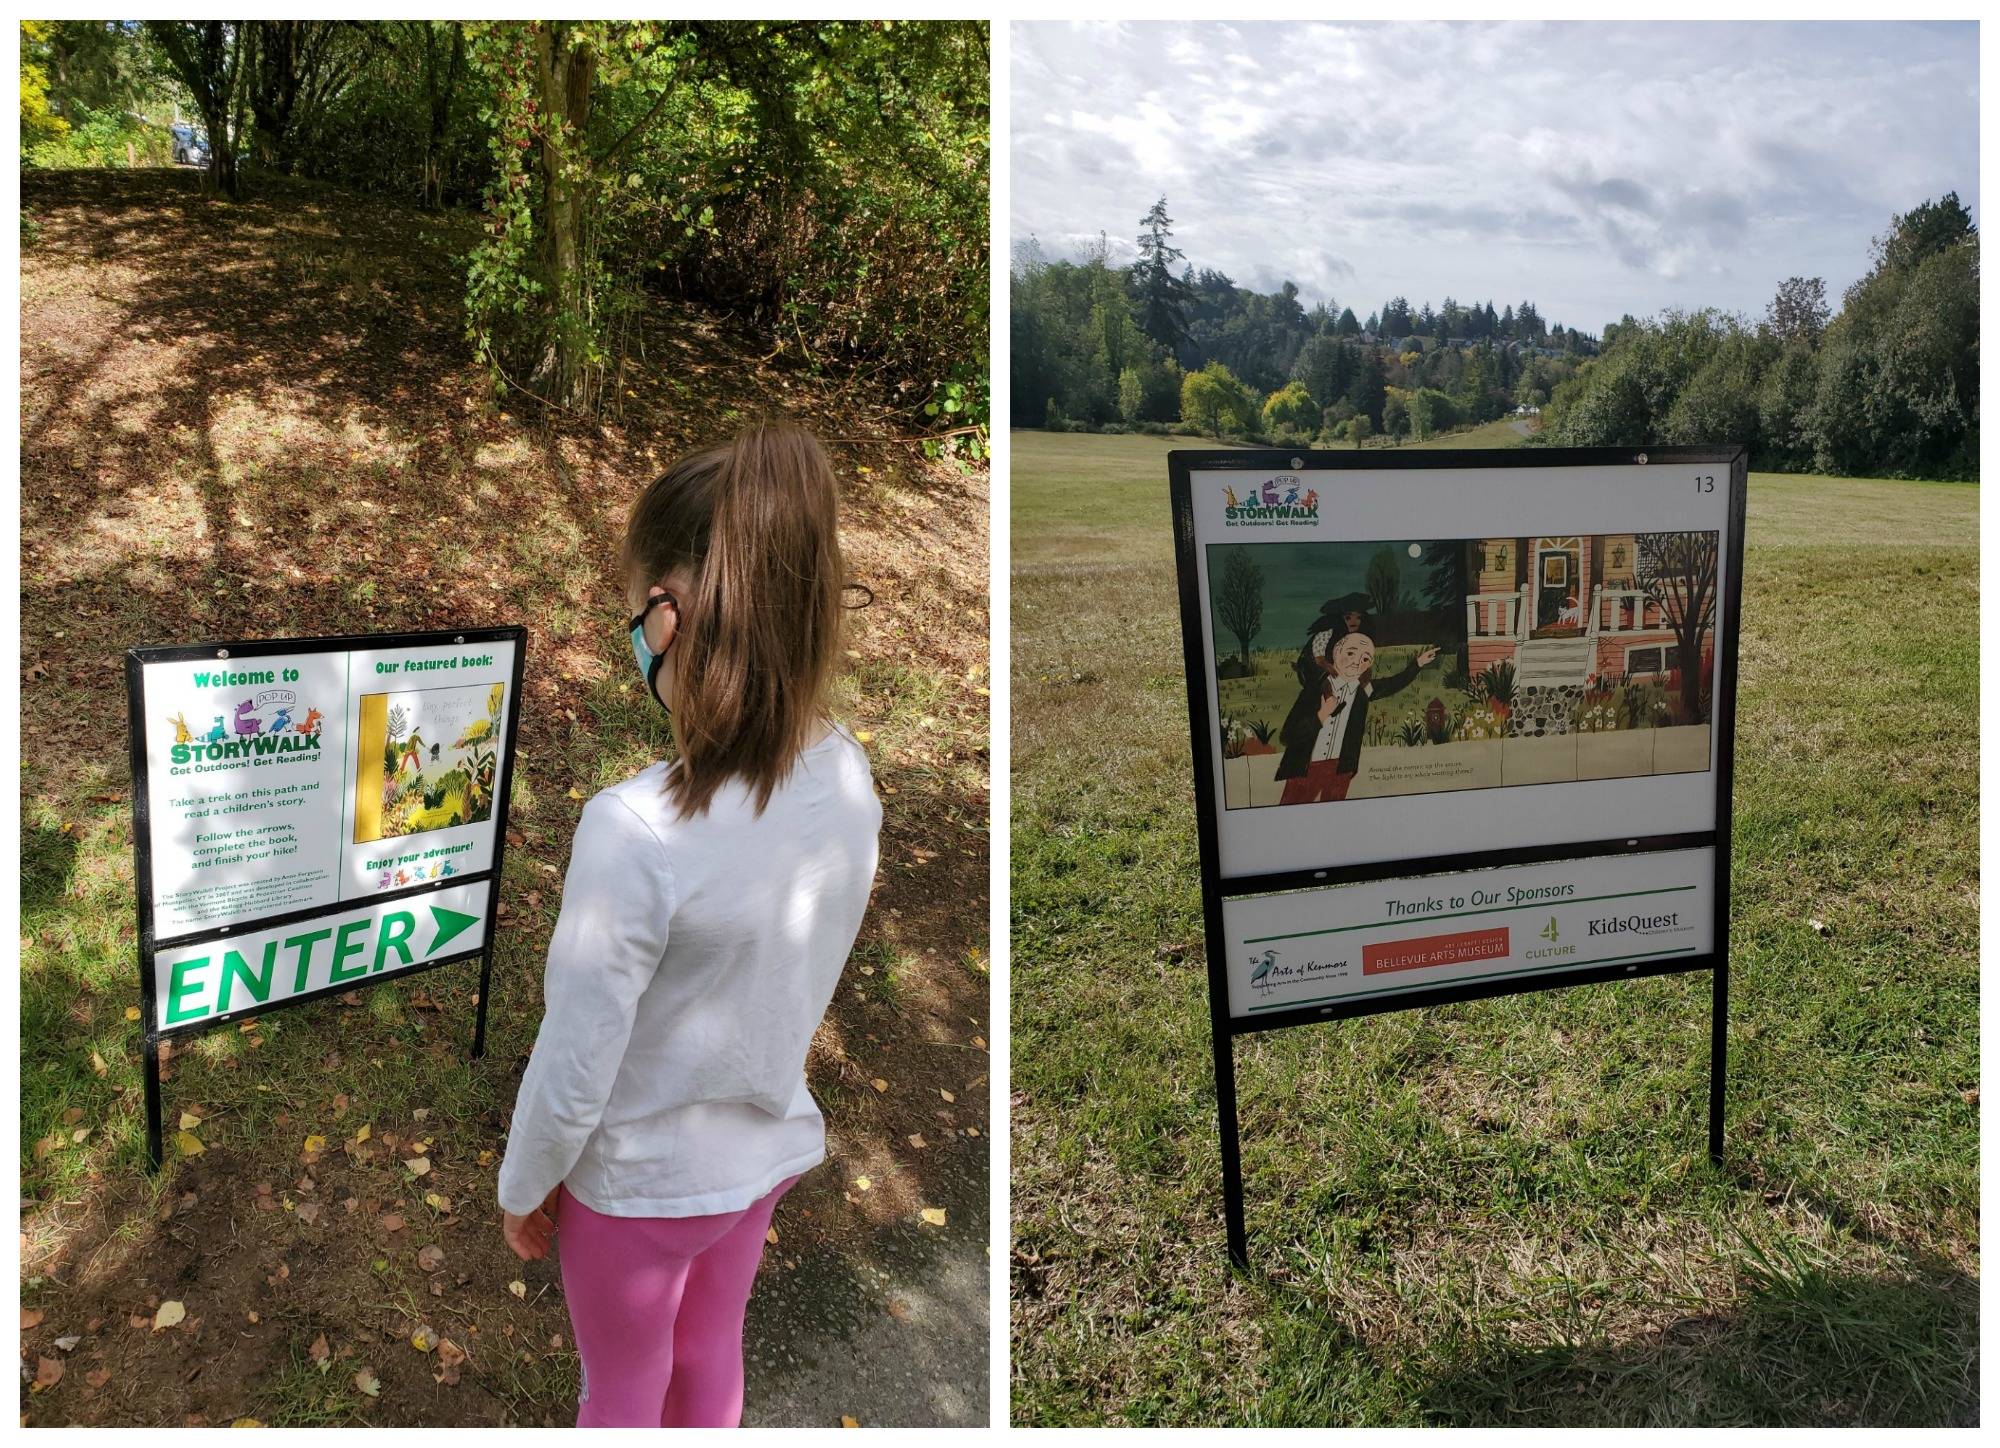 The Mercer Island Preschool Association’s Pop-Up Story Walk is happening now through Oct. 17 in Luther Burbank Park. Visitors can enjoy a short loop through the park while reading “Tiny, Perfect Things” by M.H. Clark. Just follow the signs to the next “page” of the story. “Tiny, Perfect Things” is the story of a child and a grandfather whose walk around the neighborhood leads to a day of shared wonder as they discover all sorts of tiny, perfect things together. The Story Walk will begin at the South Parking Lot (located at the intersection of Southeast 26th Street and 84th Avenue Southeast). Mercer Island Parks & Recreation and the Mercer Island Community Fund have made the event possible. Photos courtesy of the Mercer Island Preschool Association